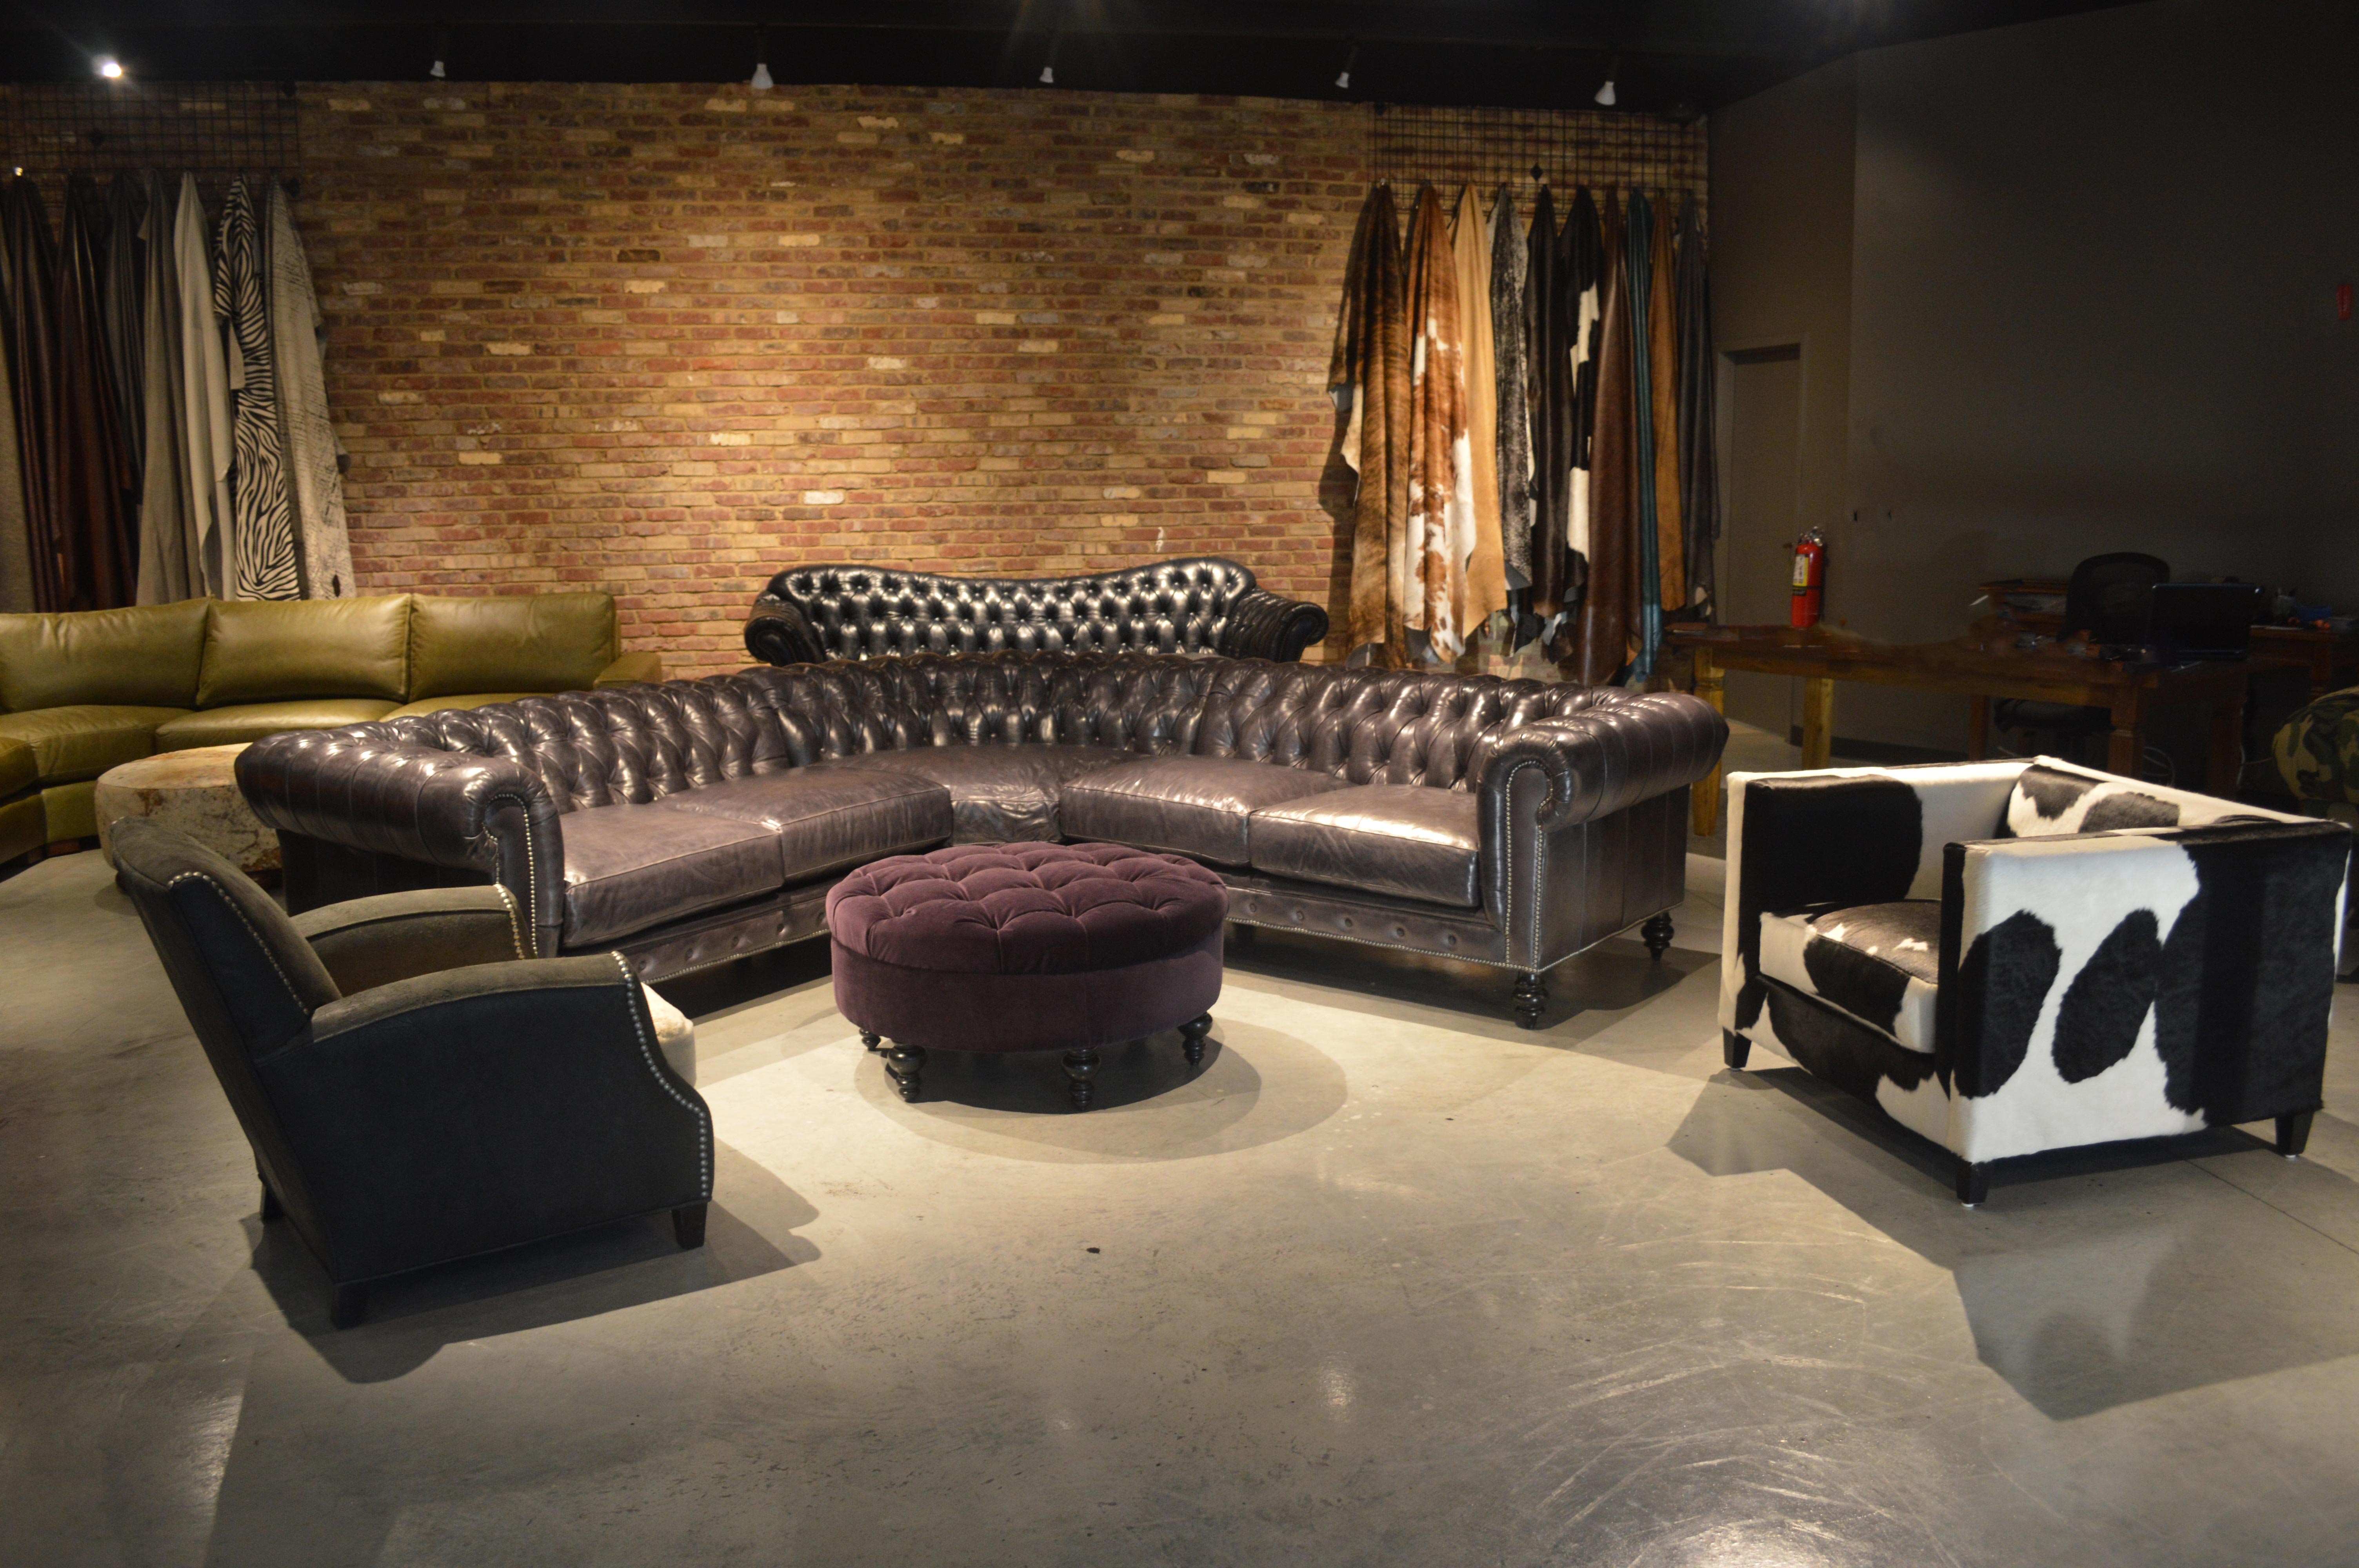 North Carolina Made-to-Order Furniture Company Opens Showroom in